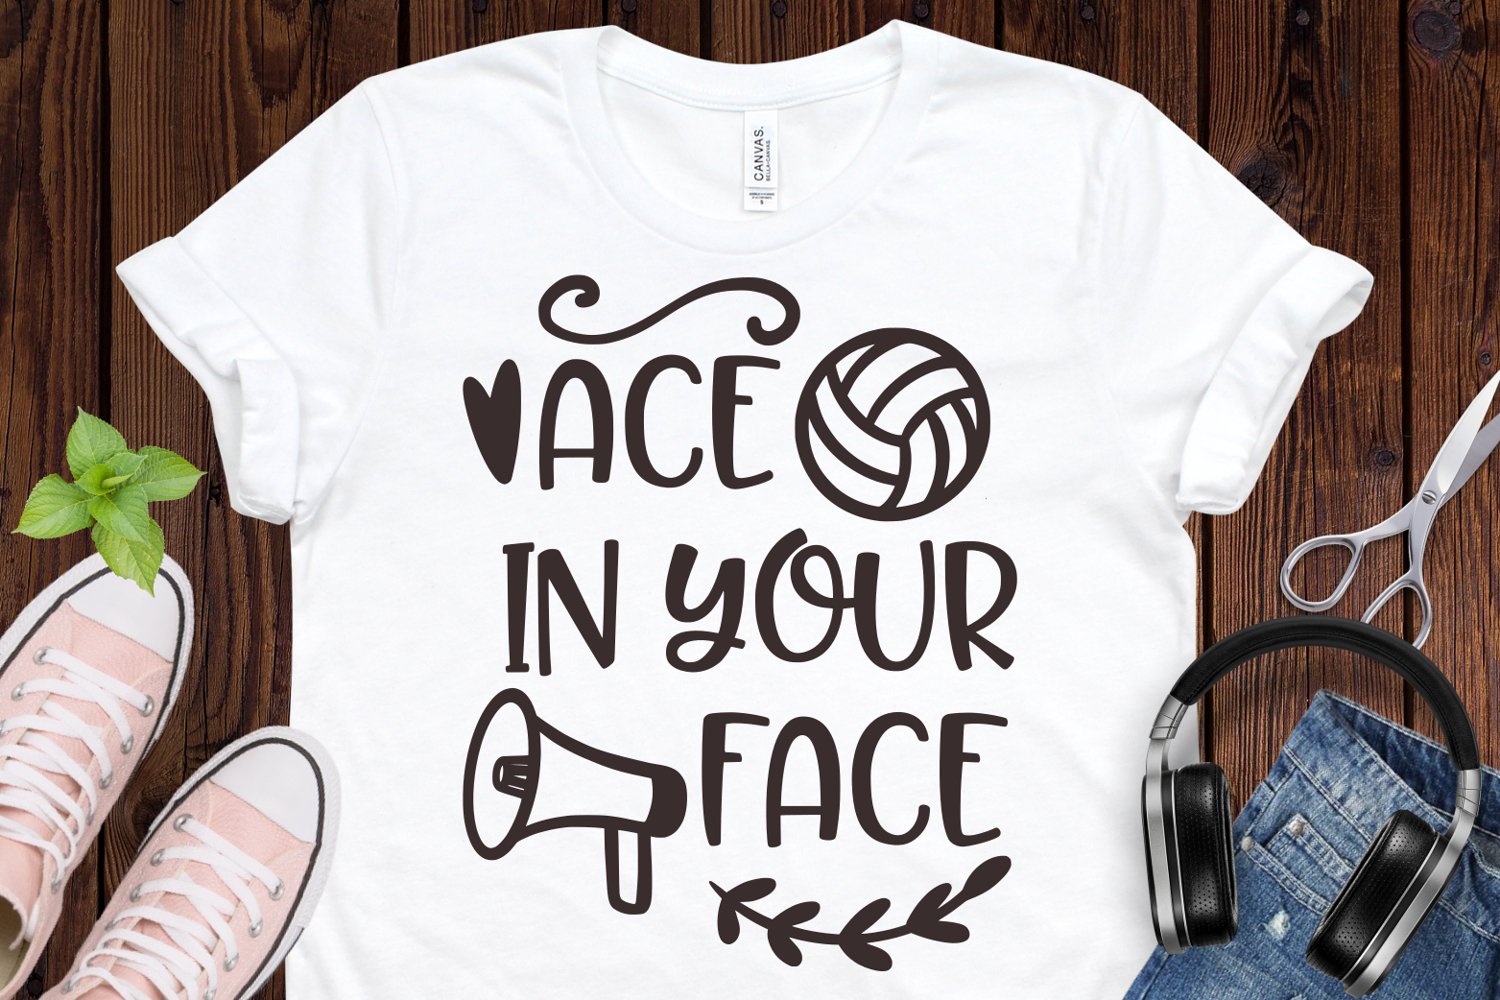 Ace in your face - t-shirt design.